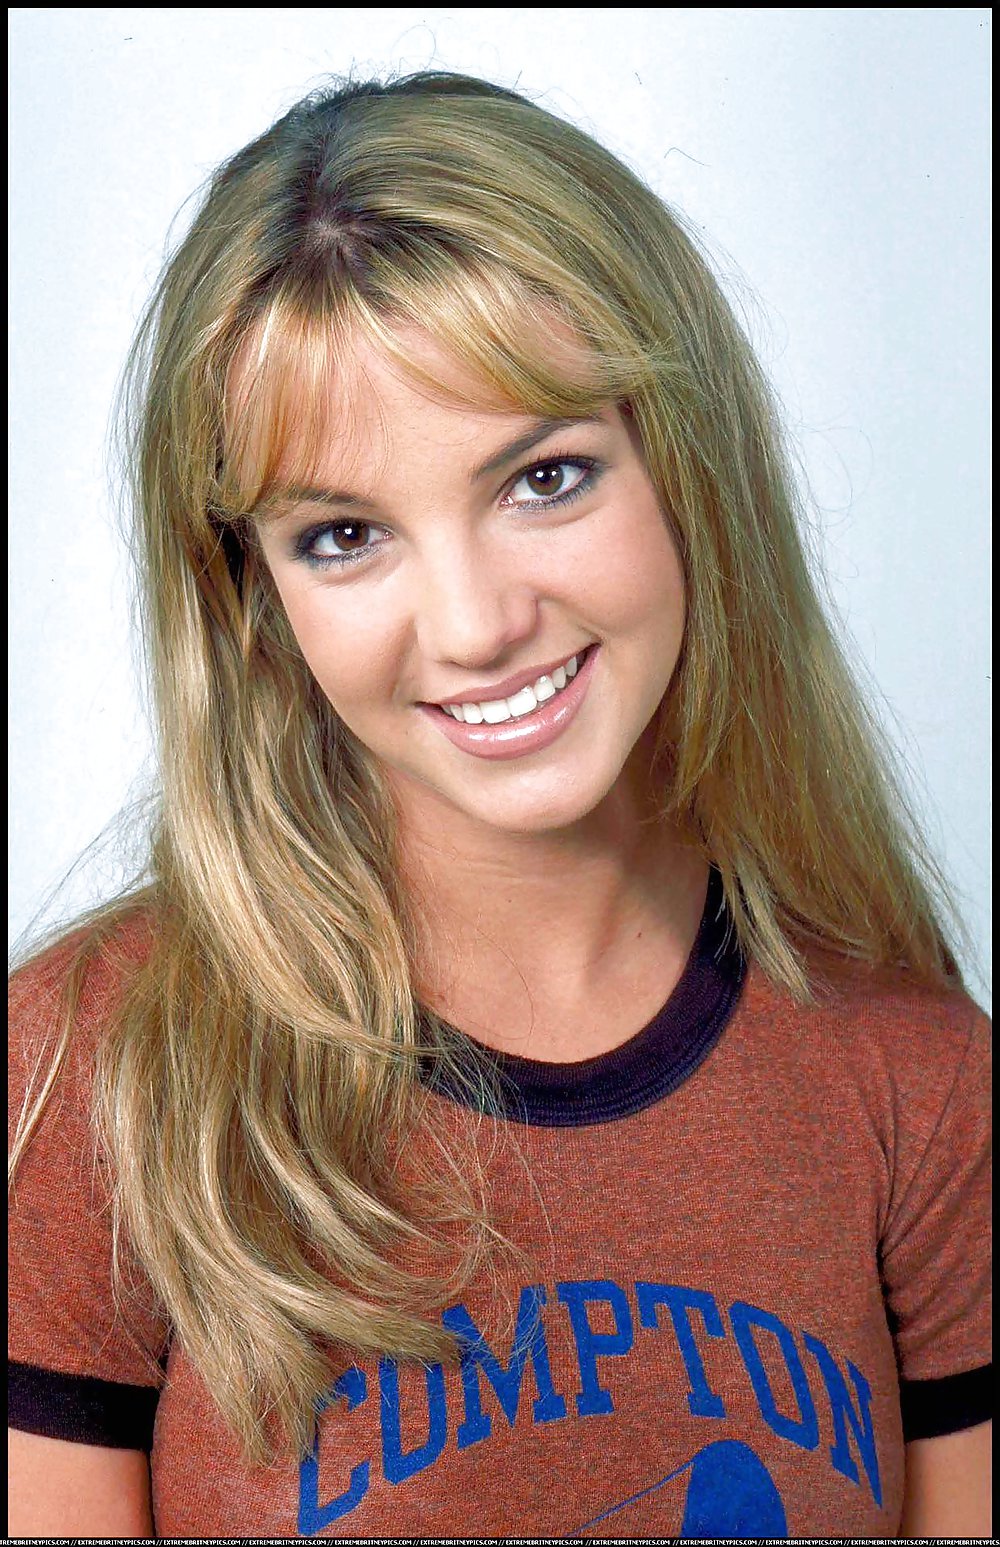 Britney Spears Nice Young & Sweet #21906973